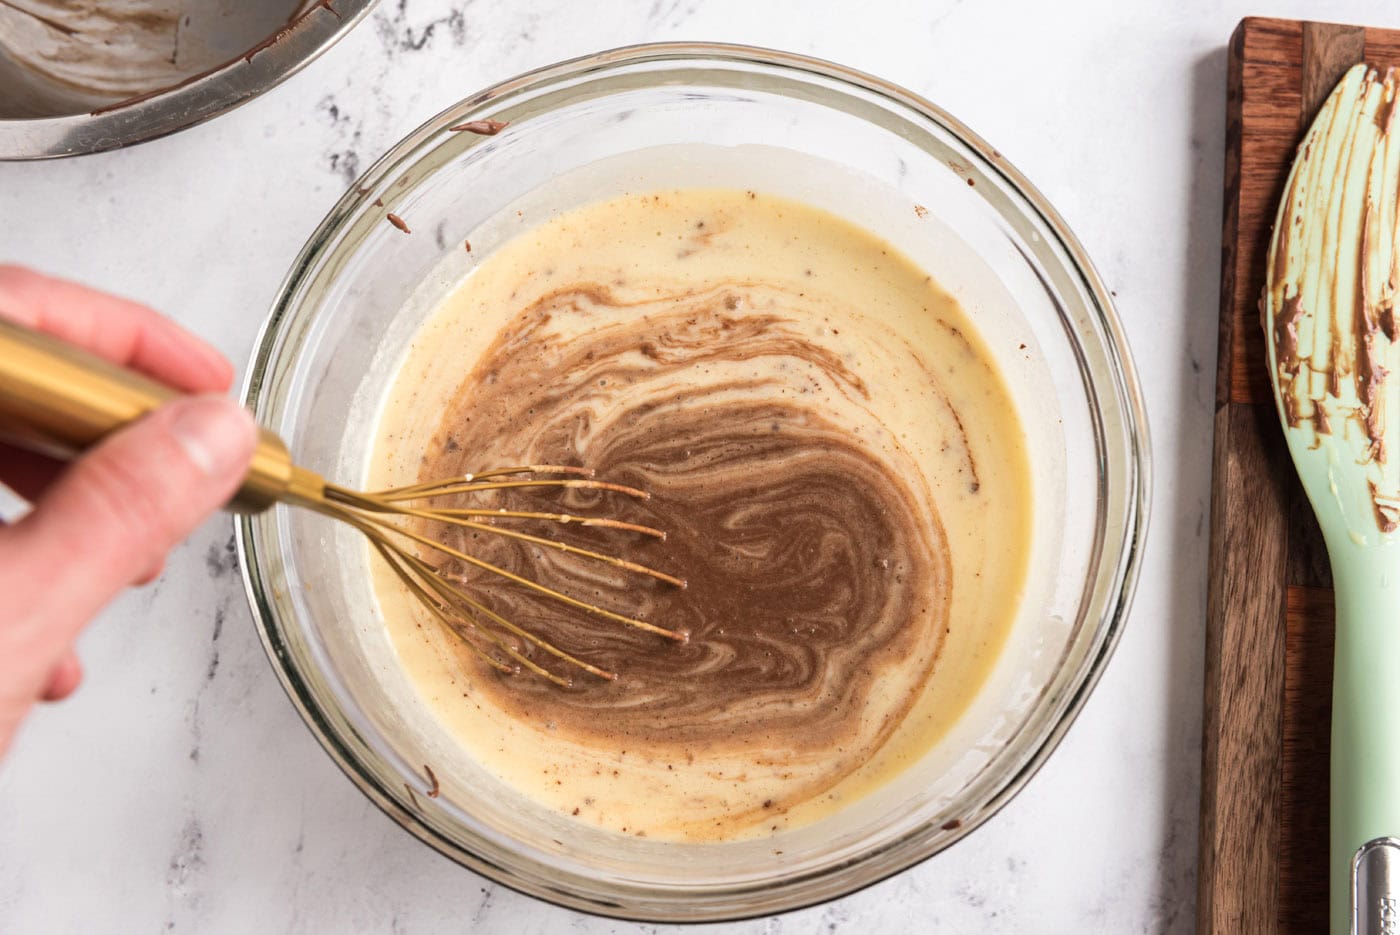 whisking chocolate mixture into egg mixture